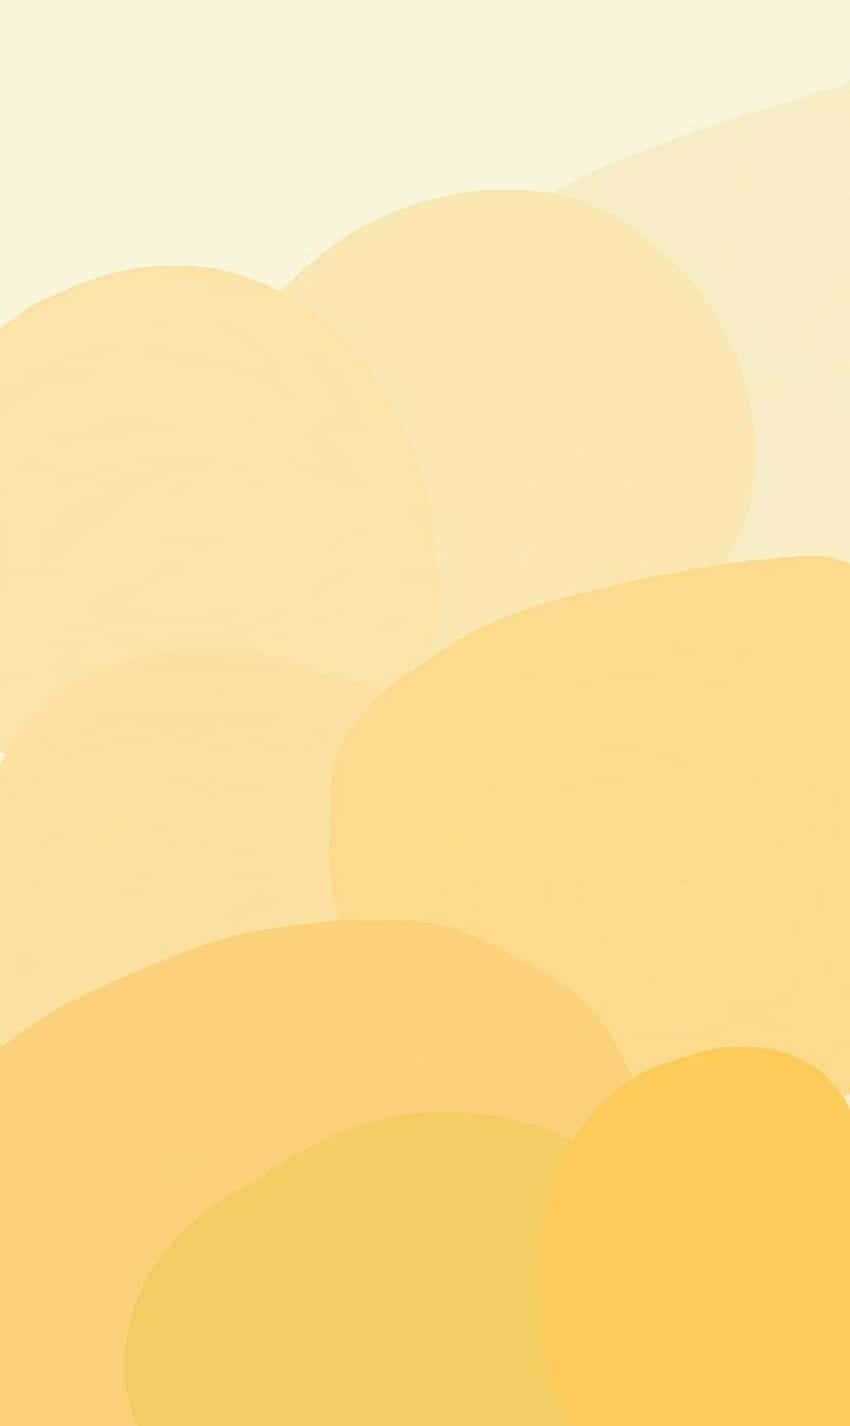 Download Bright and Warm Aesthetic of a Golden Yellow Sun Wallpaper